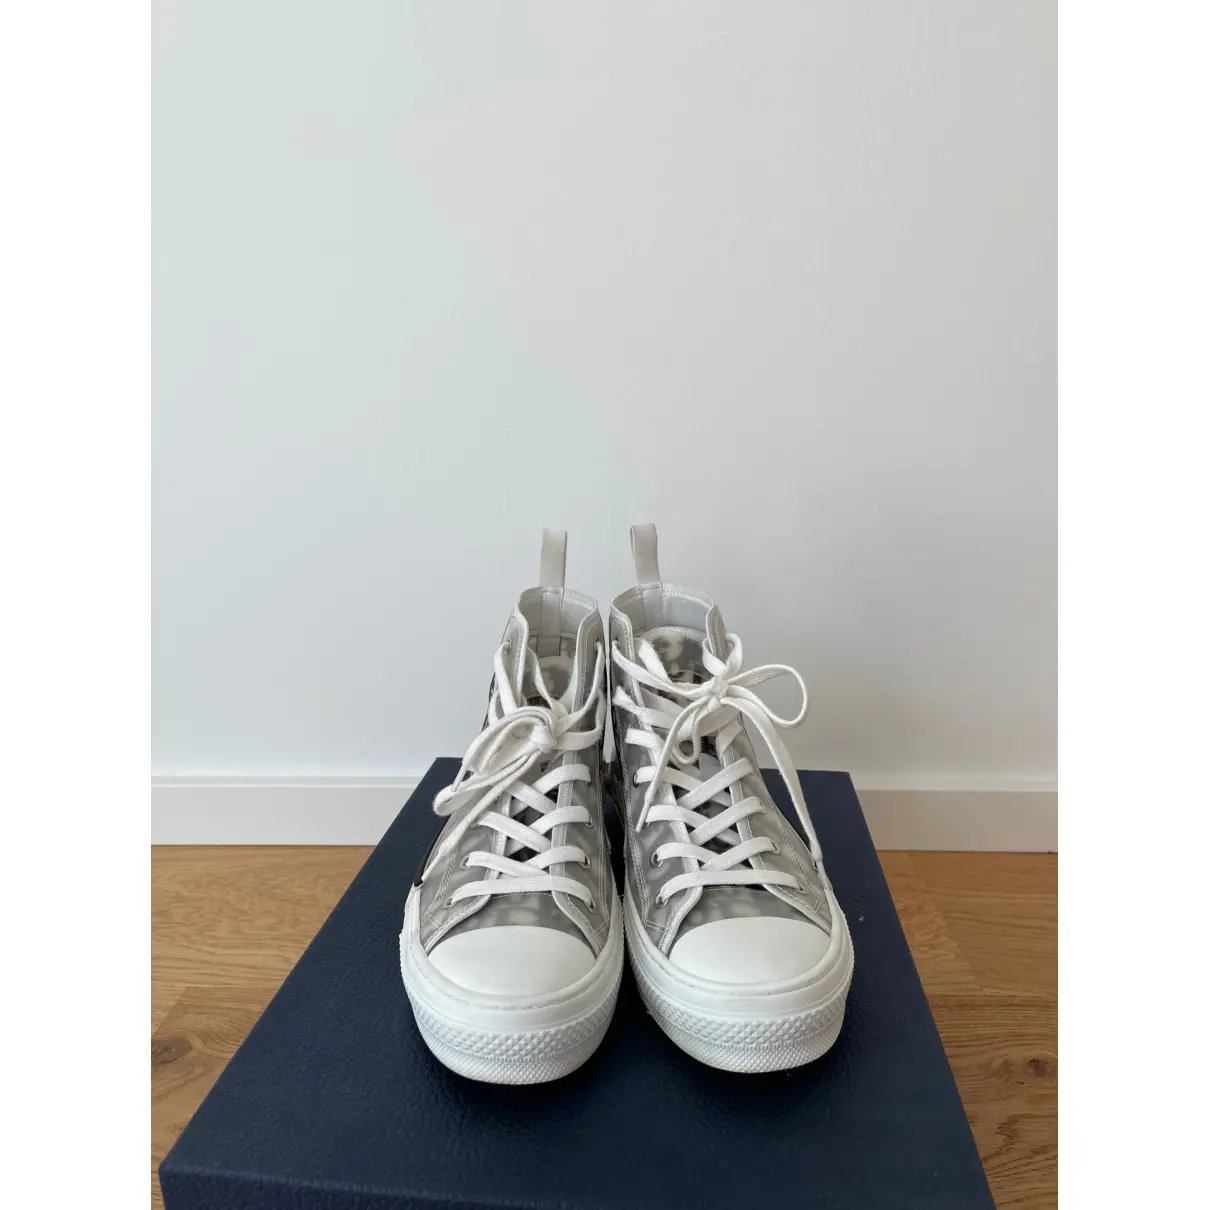 Buy Dior B23 high trainers online